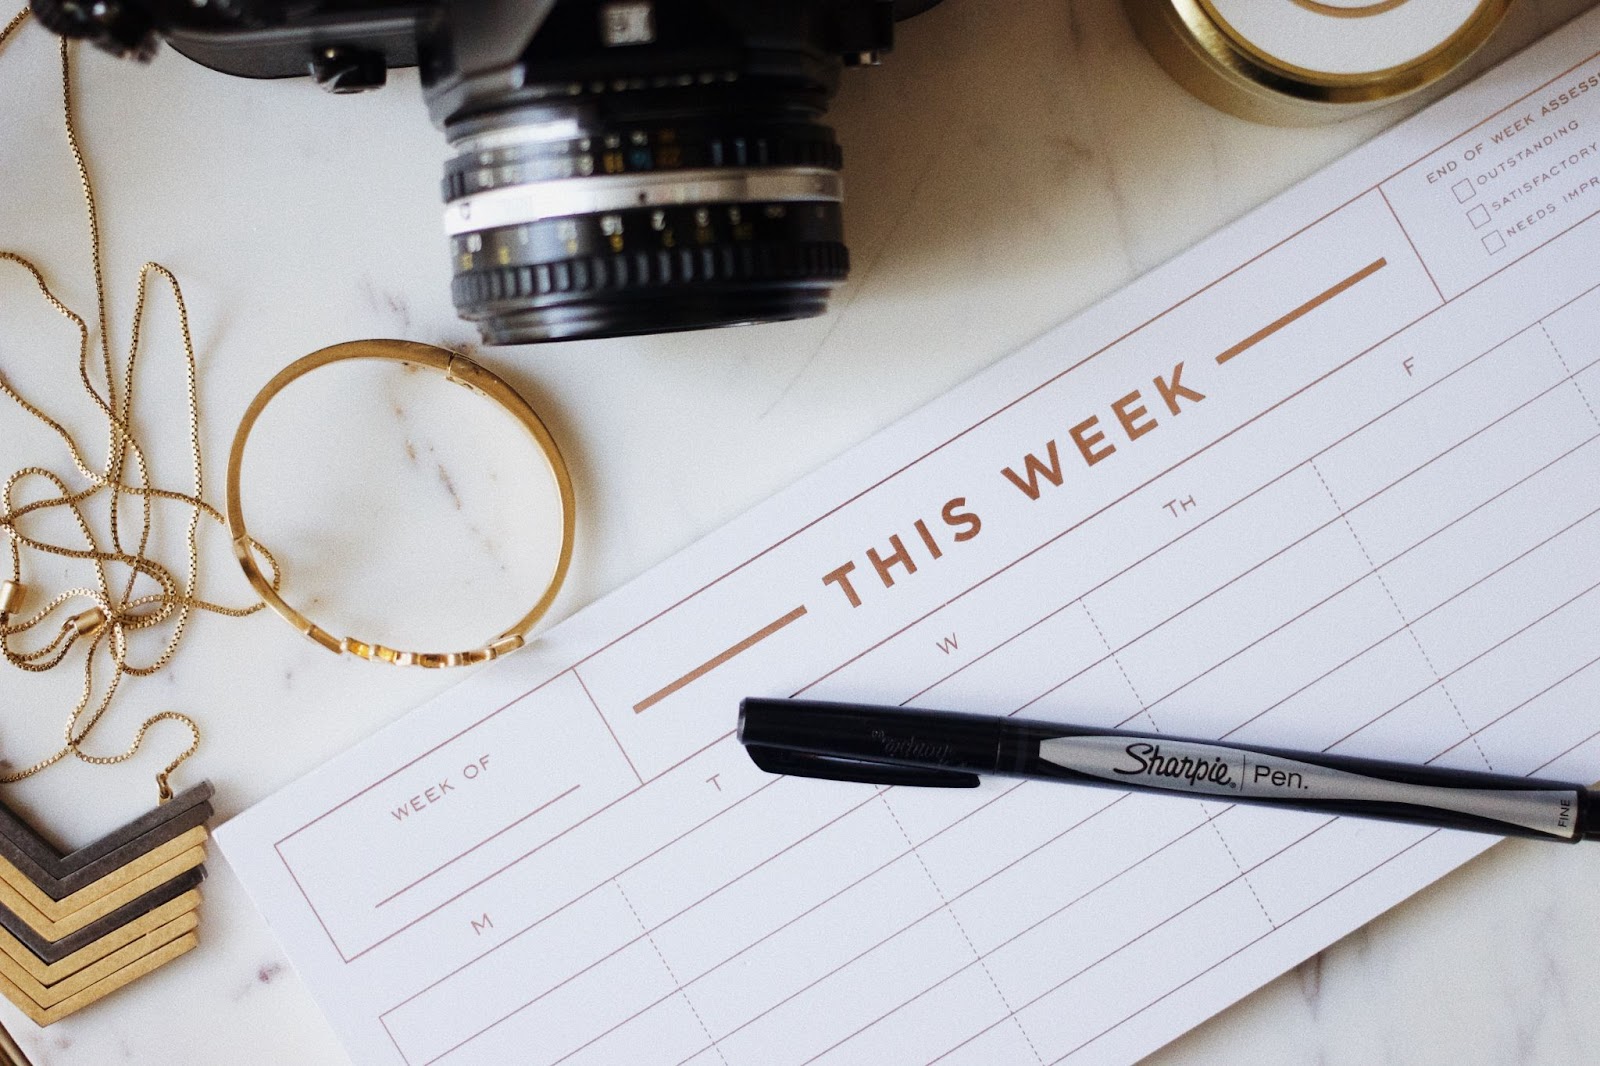 A calendar on a white marble desk surrounded by a camera, jewelry, and a Sharpie pen.